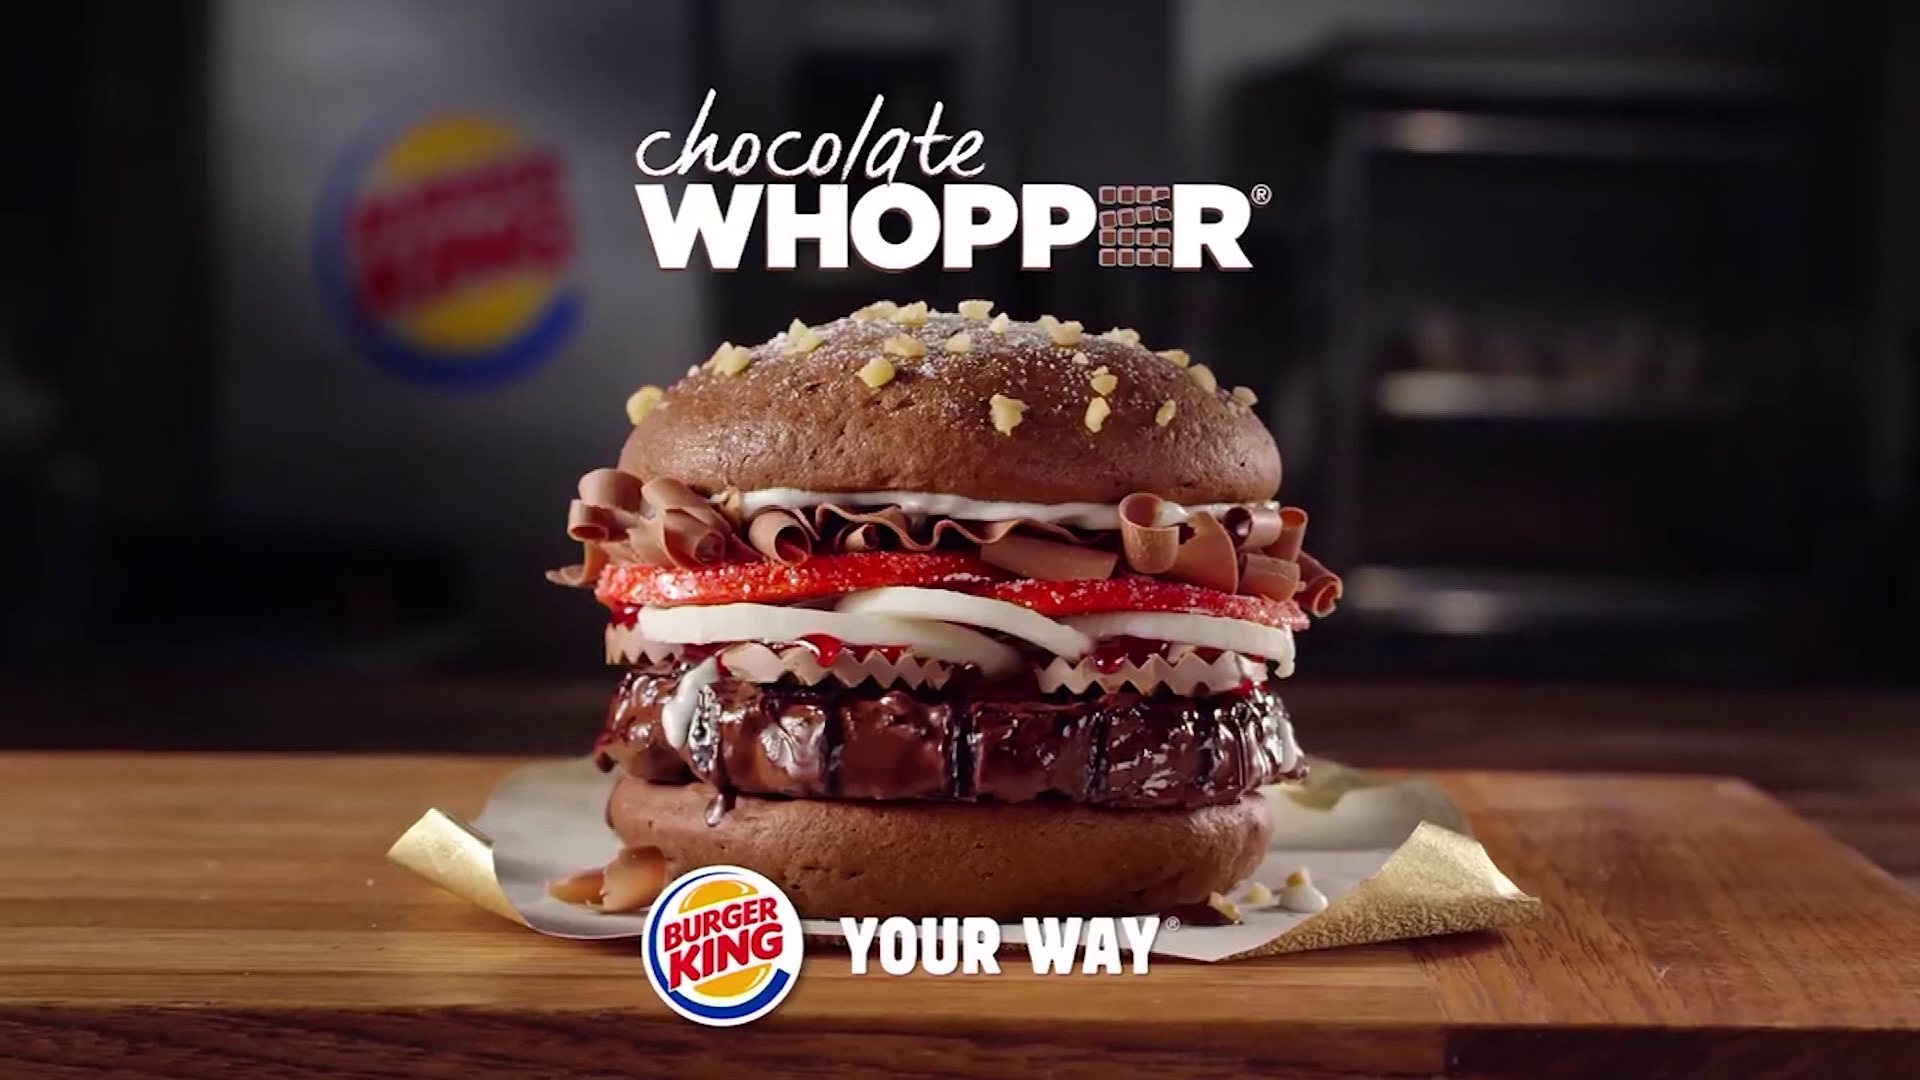 Corporations like Burger King join in on April Fools' Day fun